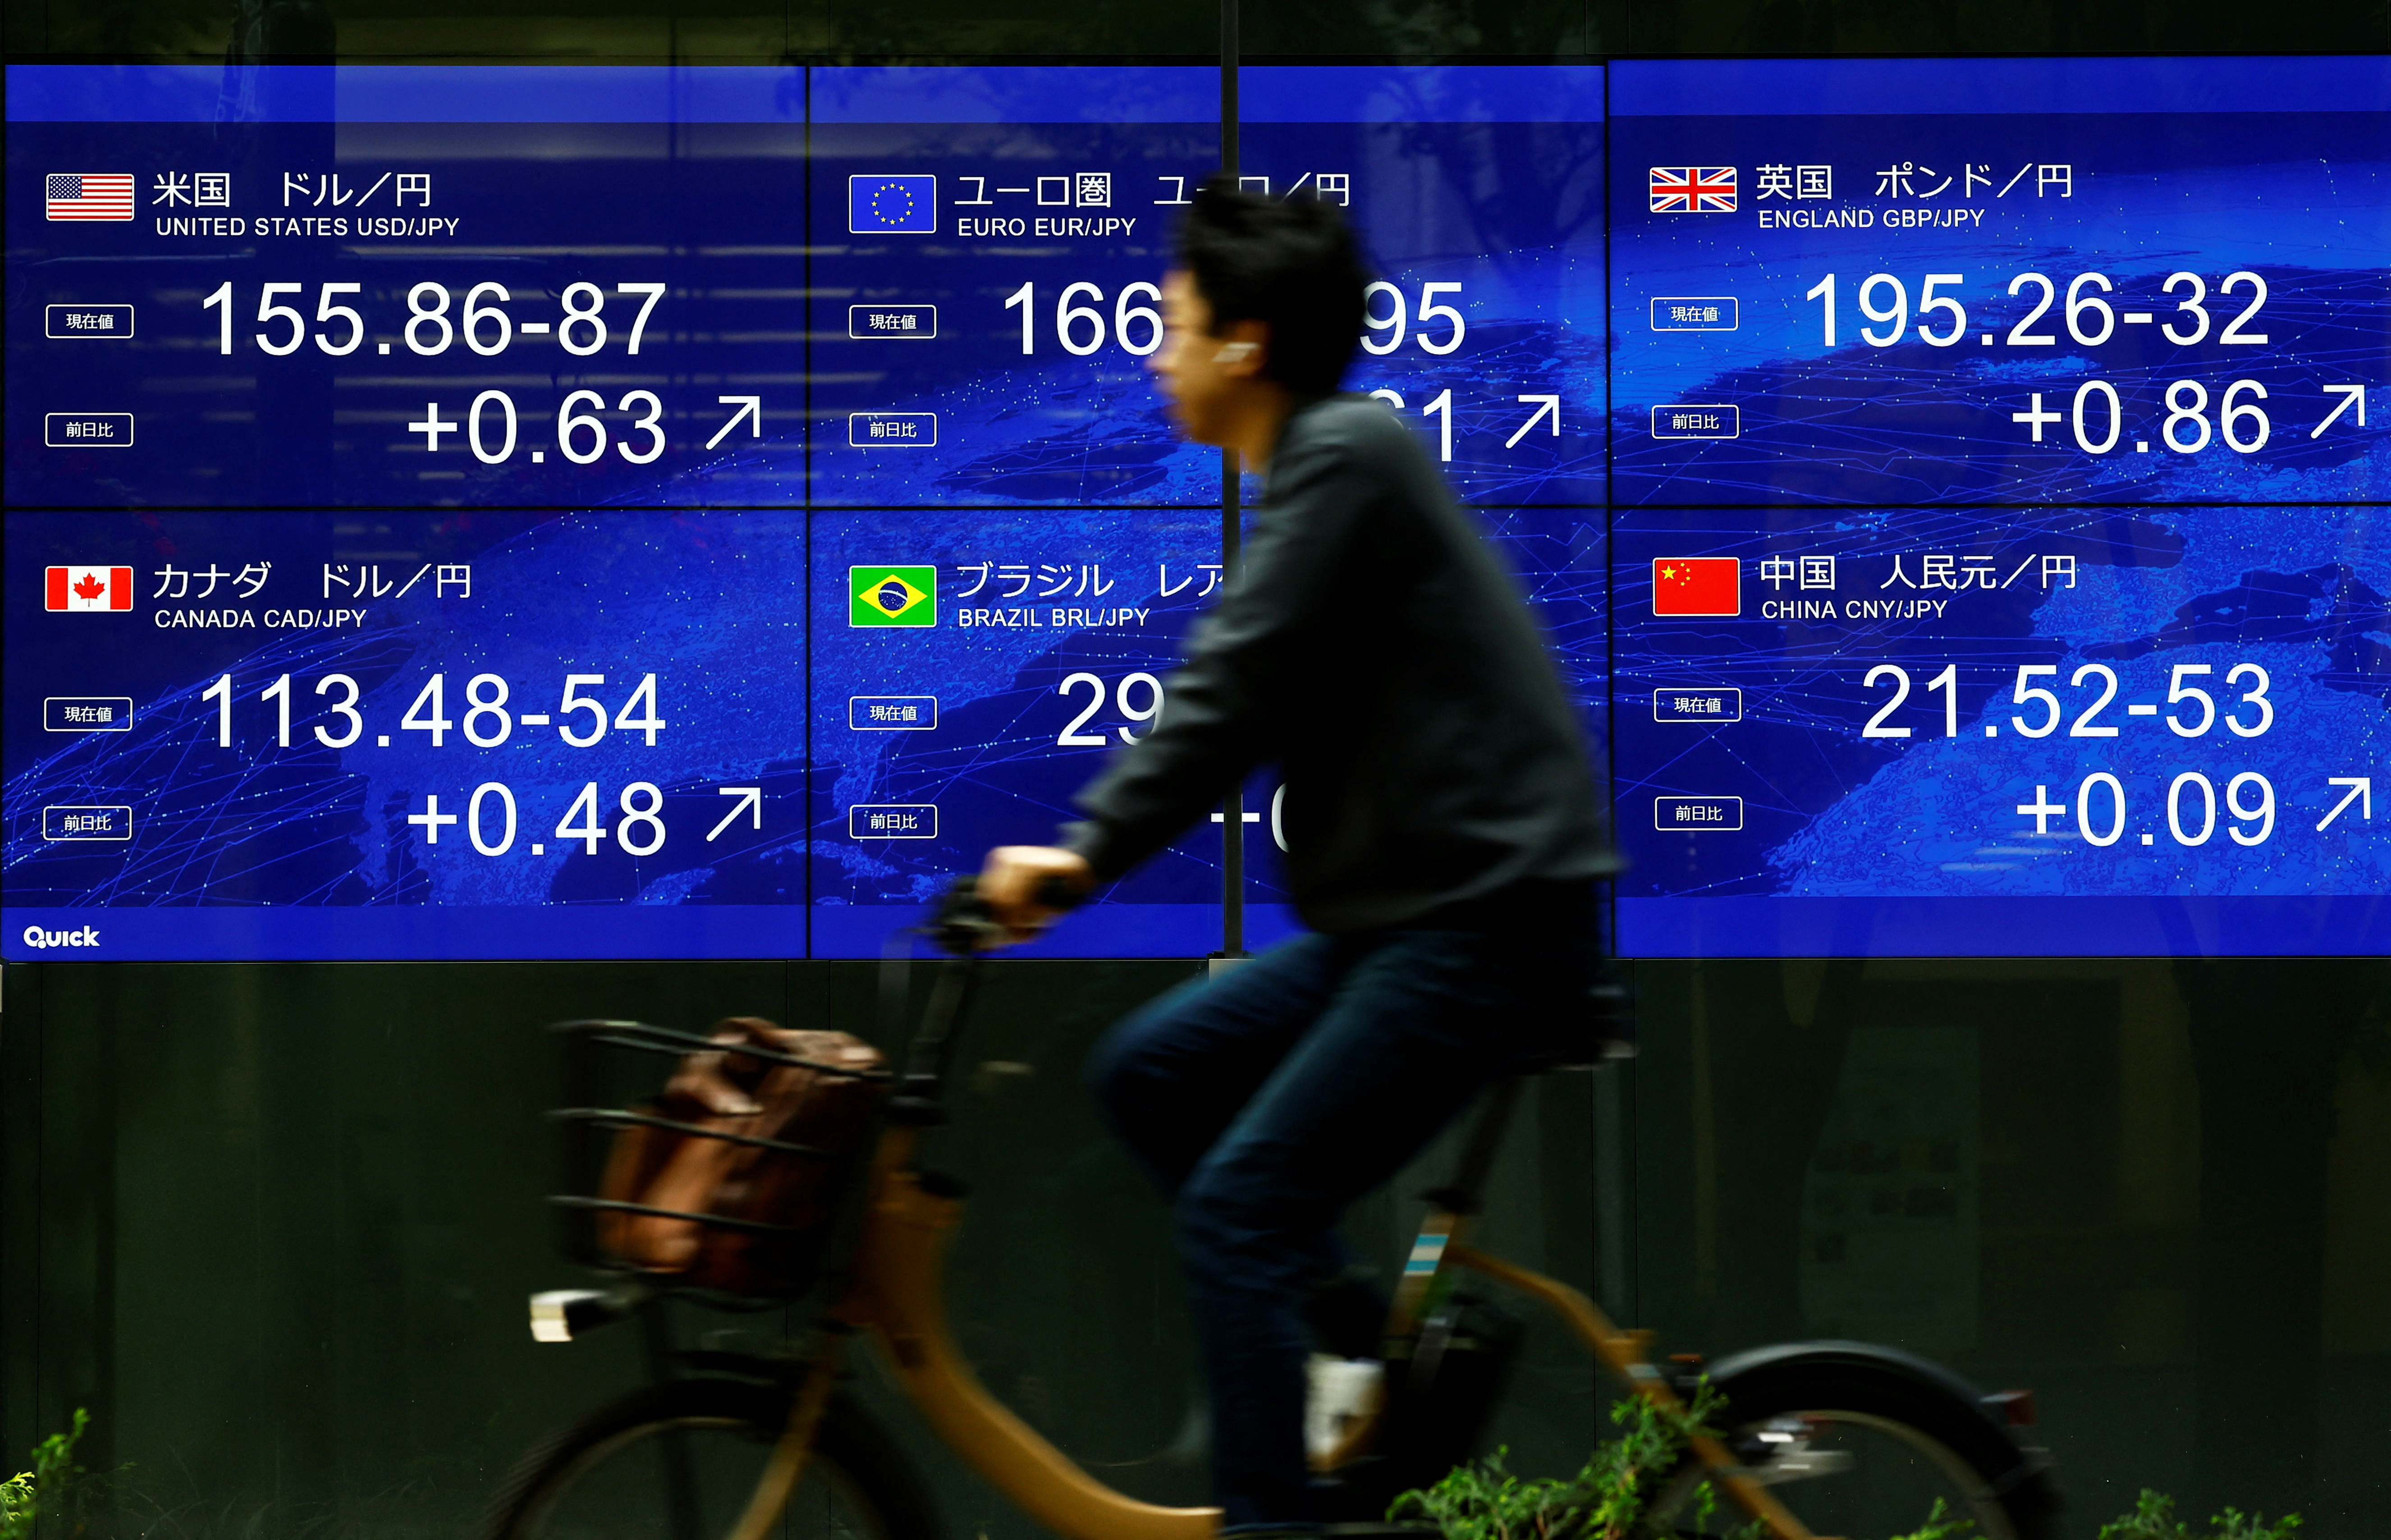 A man rides a bicycle past an electronic screen displaying the current Japanese Yen exchange rate against the U.S. dollar and other foreign currencies in Tokyo